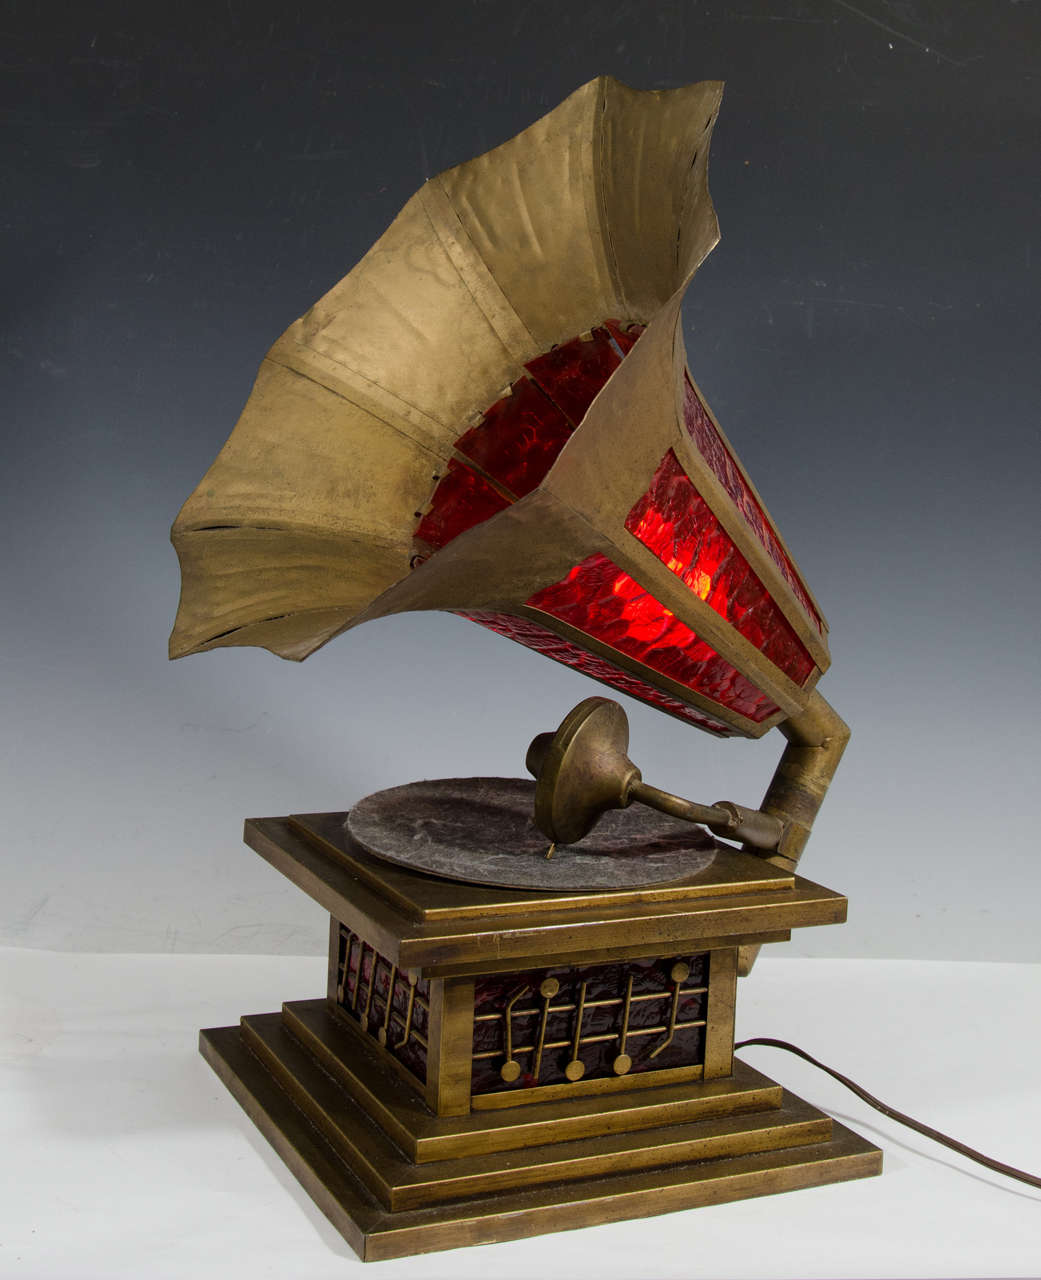 A vintage Victrola hand formed table lamp with red slag glass, circa 1940s. The glass lights internally in the base and speaker.

Good vintage condition with age appropriate wear and patina.